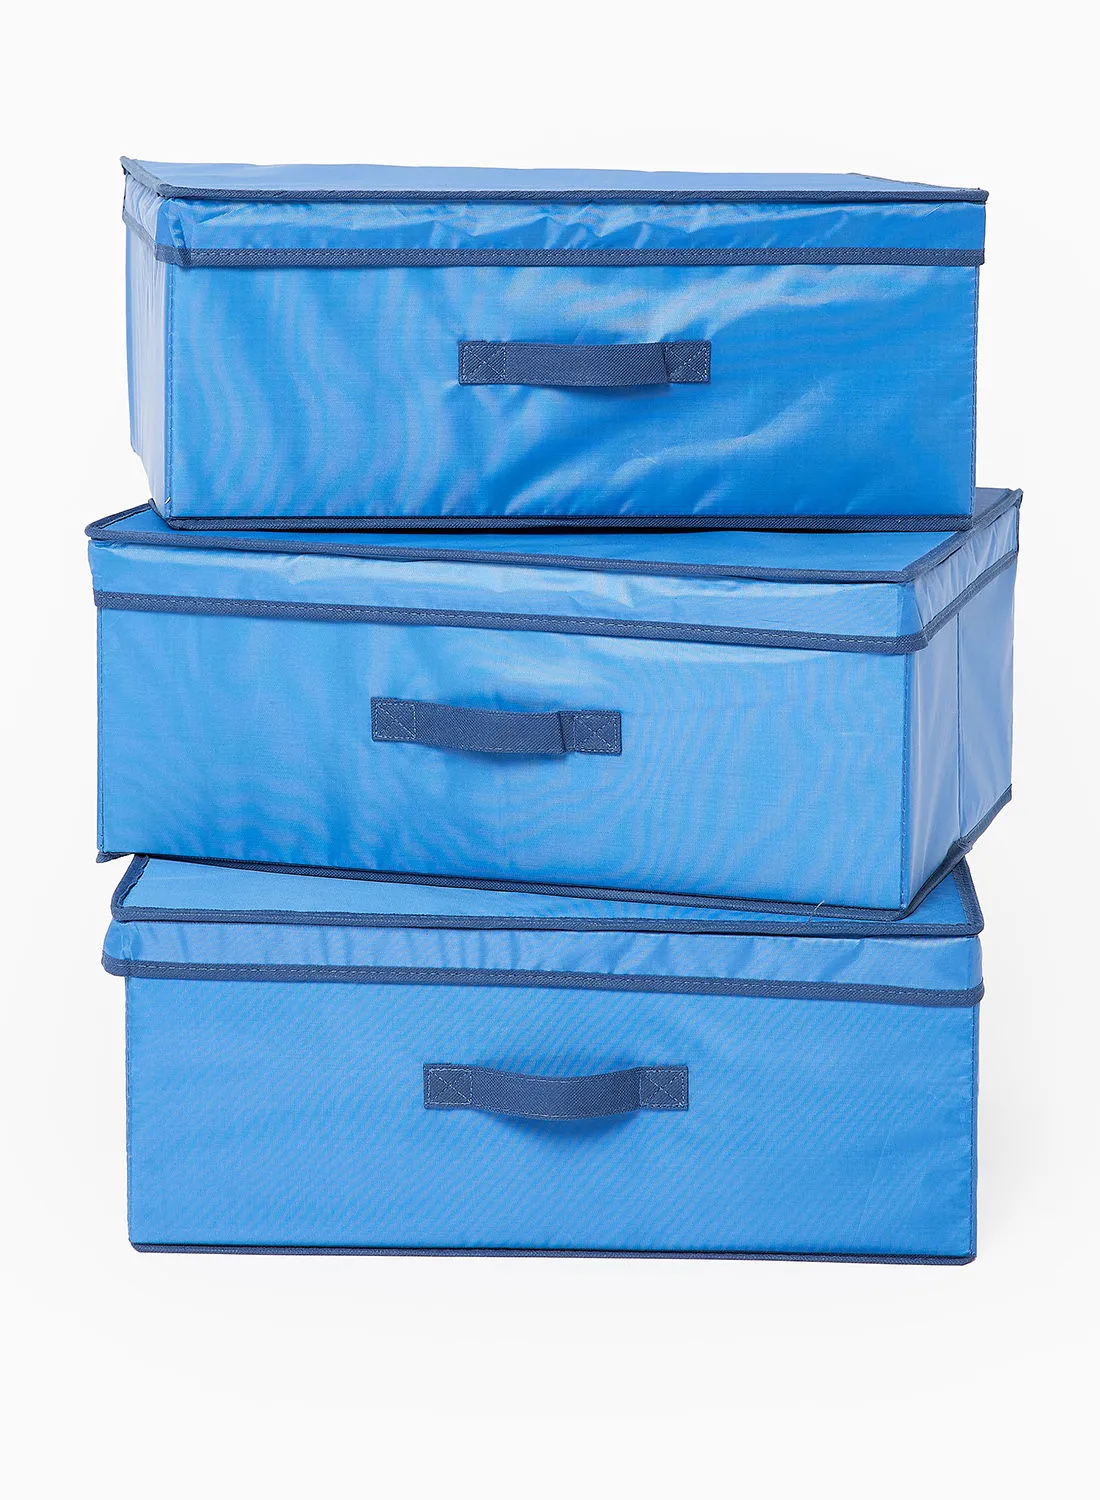 Amal Foldable Storage Organizer In Set Of 3 With Top Zipper And Handles Blue 50X40X20cm